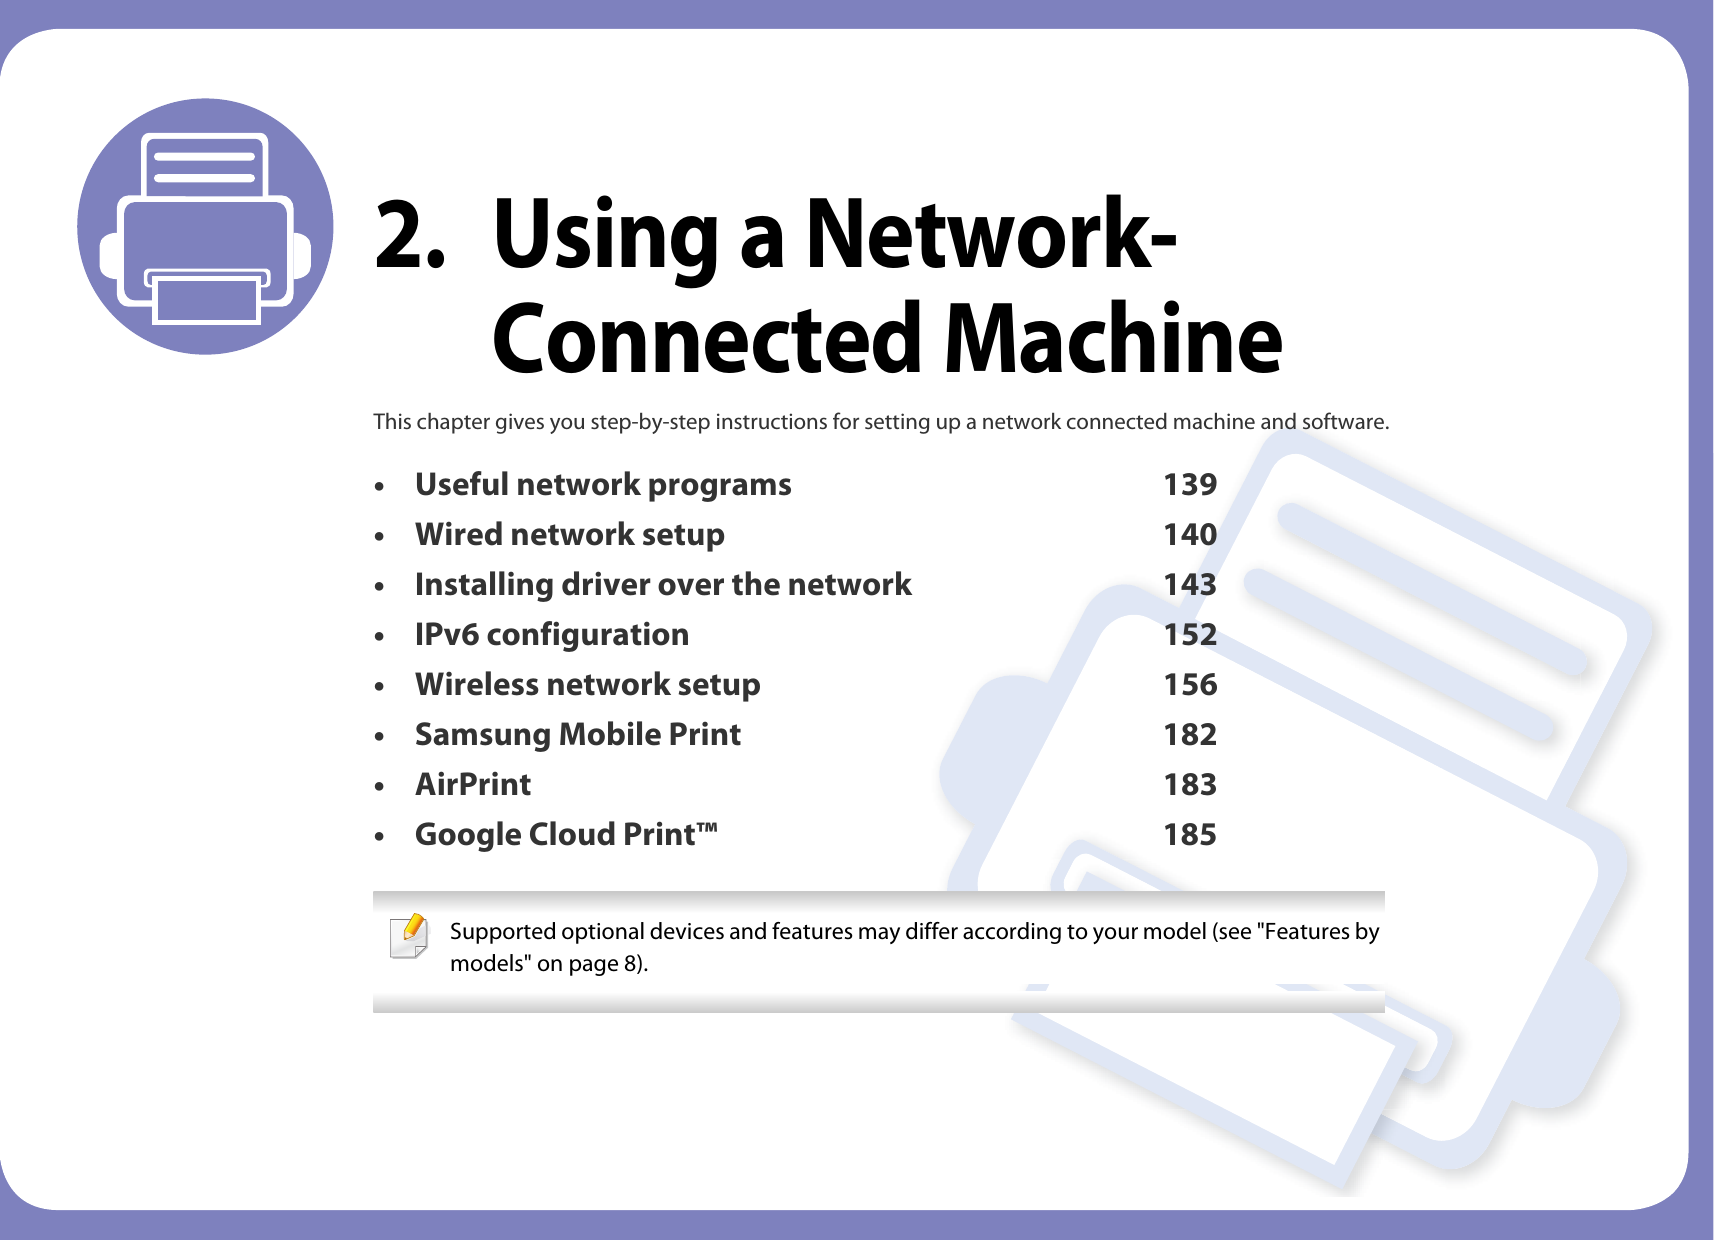 2. Using a Network-Connected MachineThis chapter gives you step-by-step instructions for setting up a network connected machine and software.• Useful network programs 139• Wired network setup 140• Installing driver over the network 143• IPv6 configuration 152• Wireless network setup 156• Samsung Mobile Print 182• AirPrint 183• Google Cloud Print™ 185 Supported optional devices and features may differ according to your model (see &quot;Features by models&quot; on page 8). 